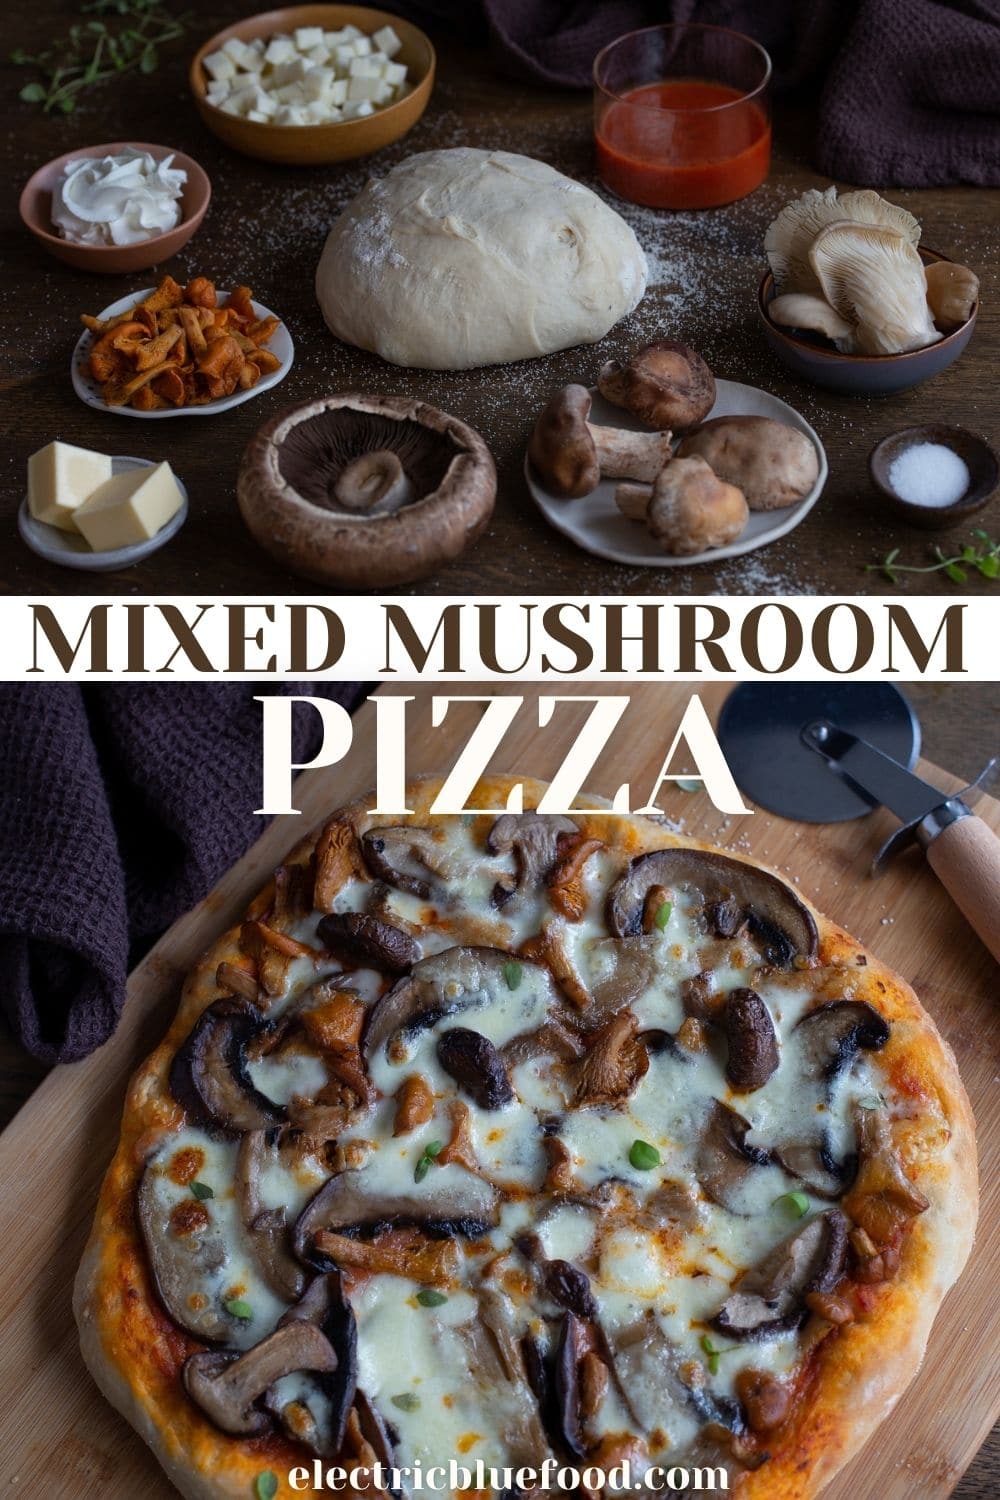 Mixed mushroom pizza with goat cheese swirls is a delicious vegetarian pizza that features 4 different types of mushrooms and a cute finish with piped fresh goat cheese.